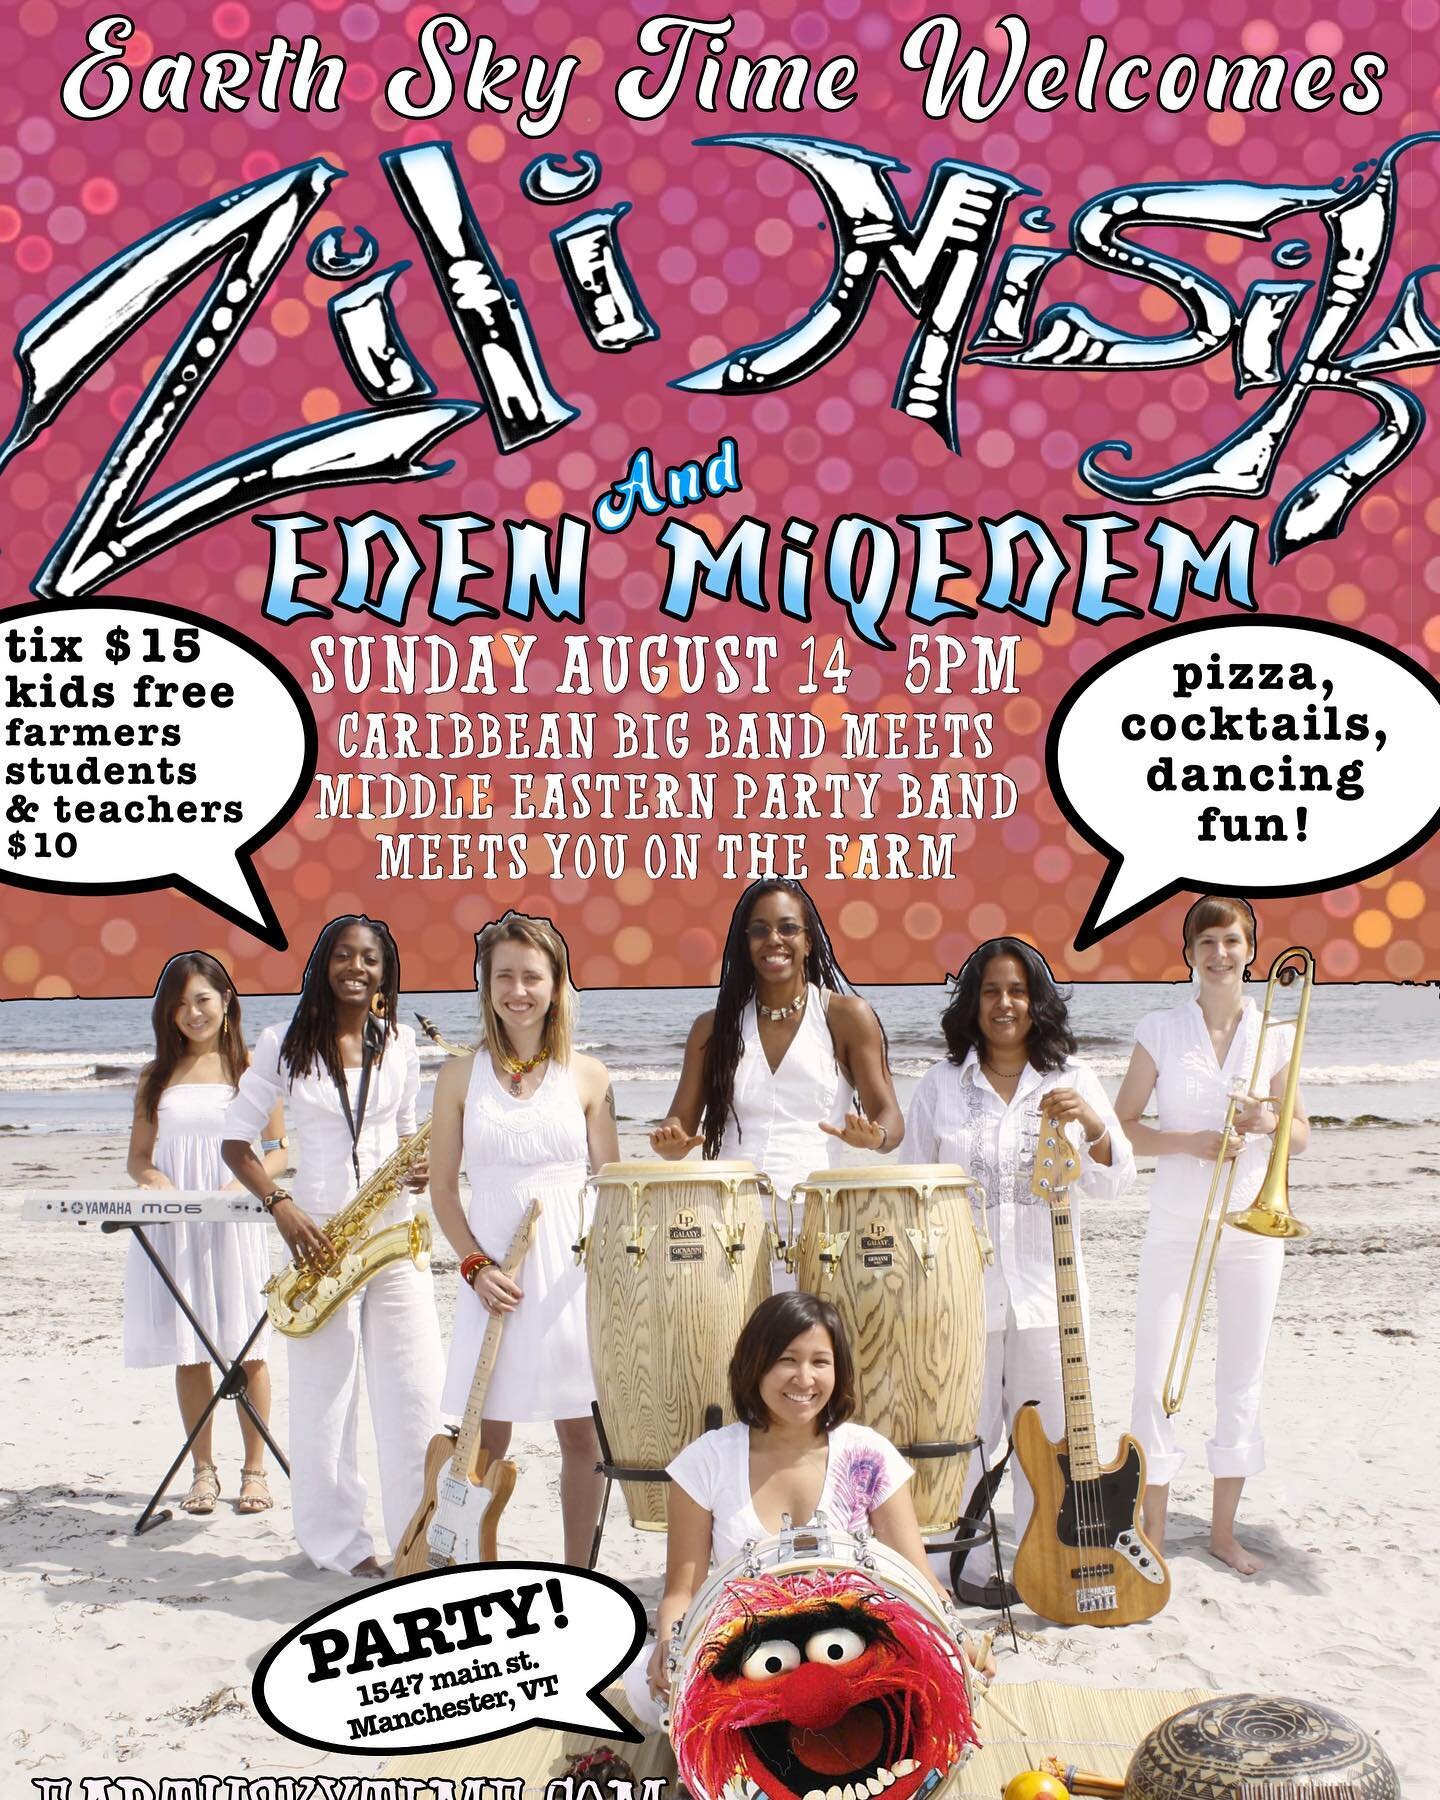 We&rsquo;re excited to welcome @zilimisik back to the farm this Sunday August 14th. Here&rsquo;s a clip when they played here in 2019. Zili is a high energy all female musical powerhouse with super strong Afro-Caribbean vibes. Eden MiQedem is a psych